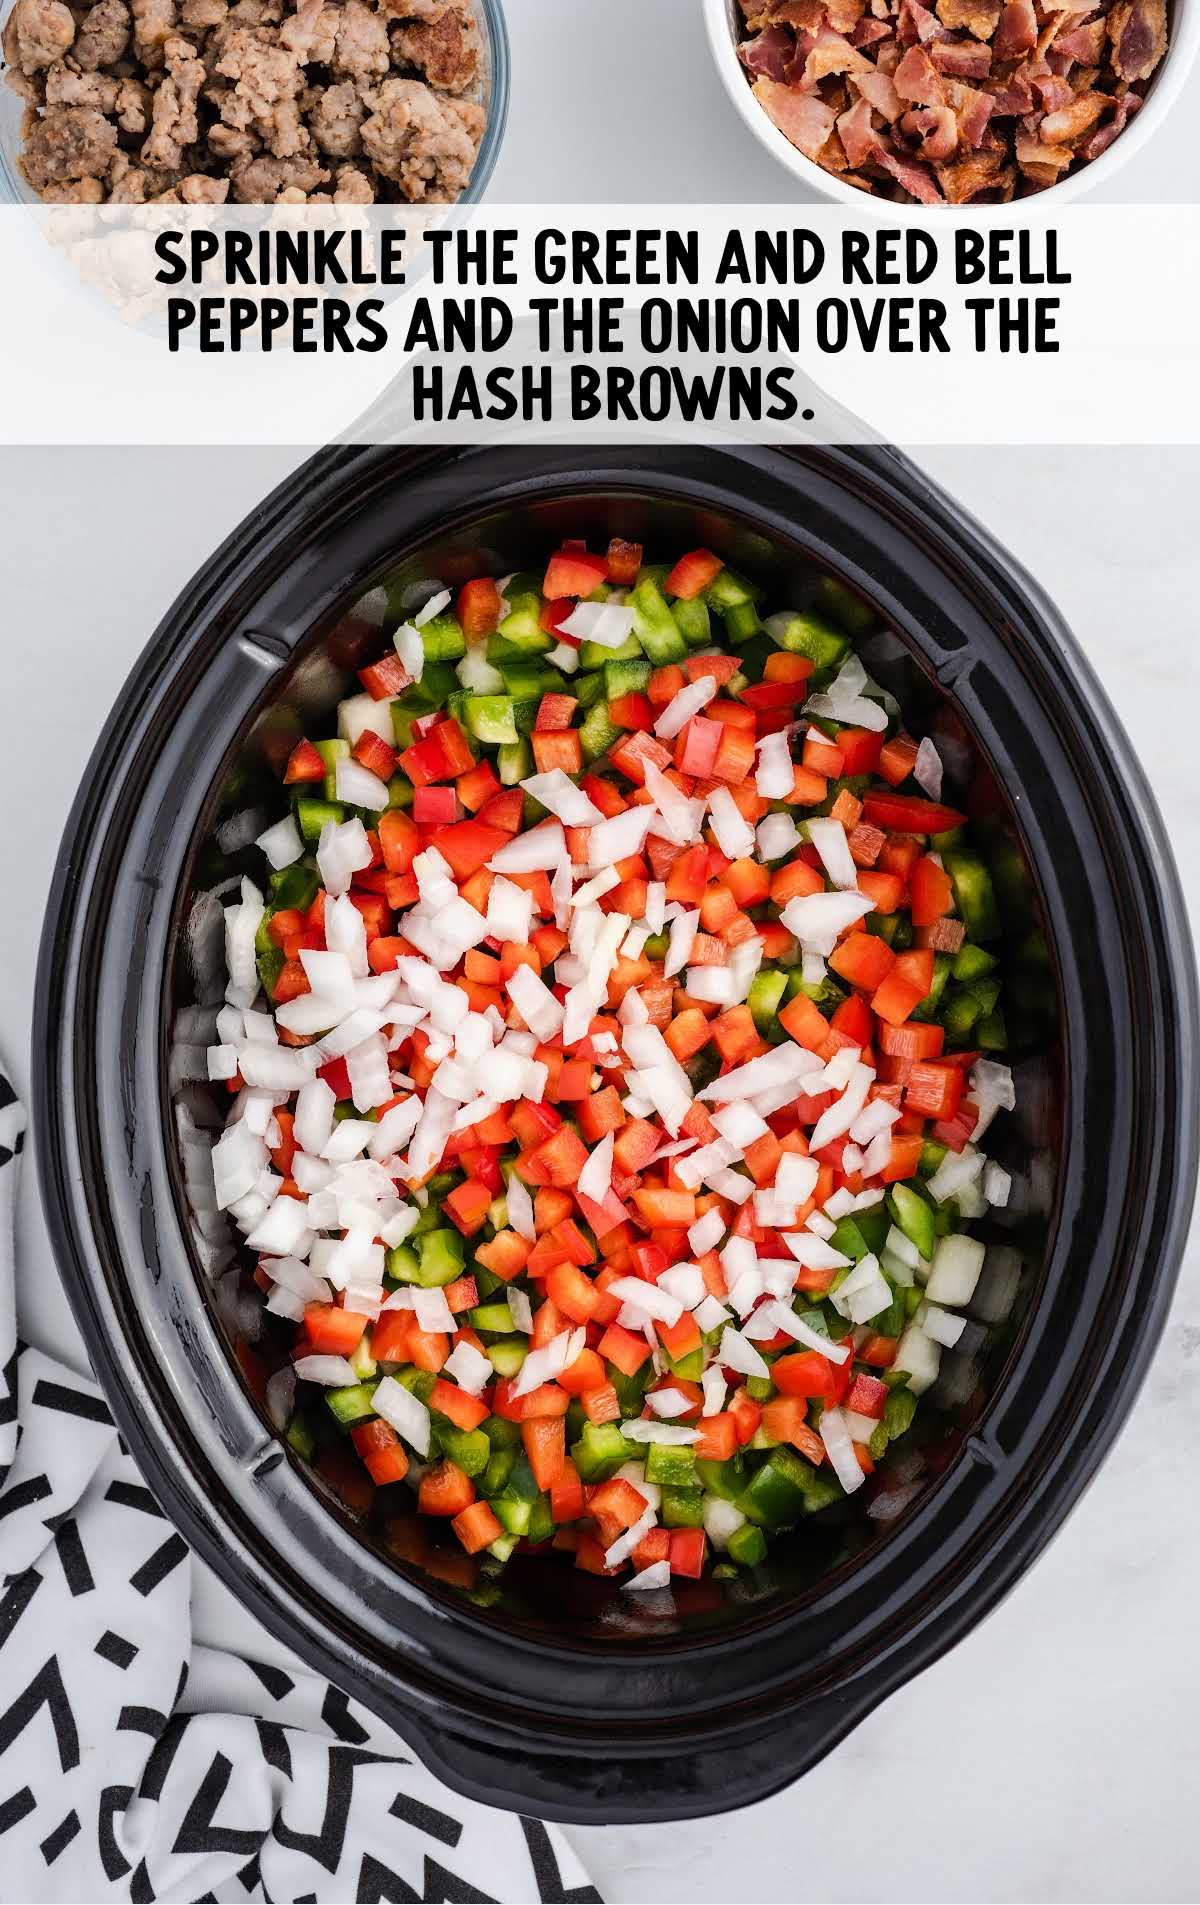 green red bell peppers and onion sprinkled over the hash browns in a crockpot